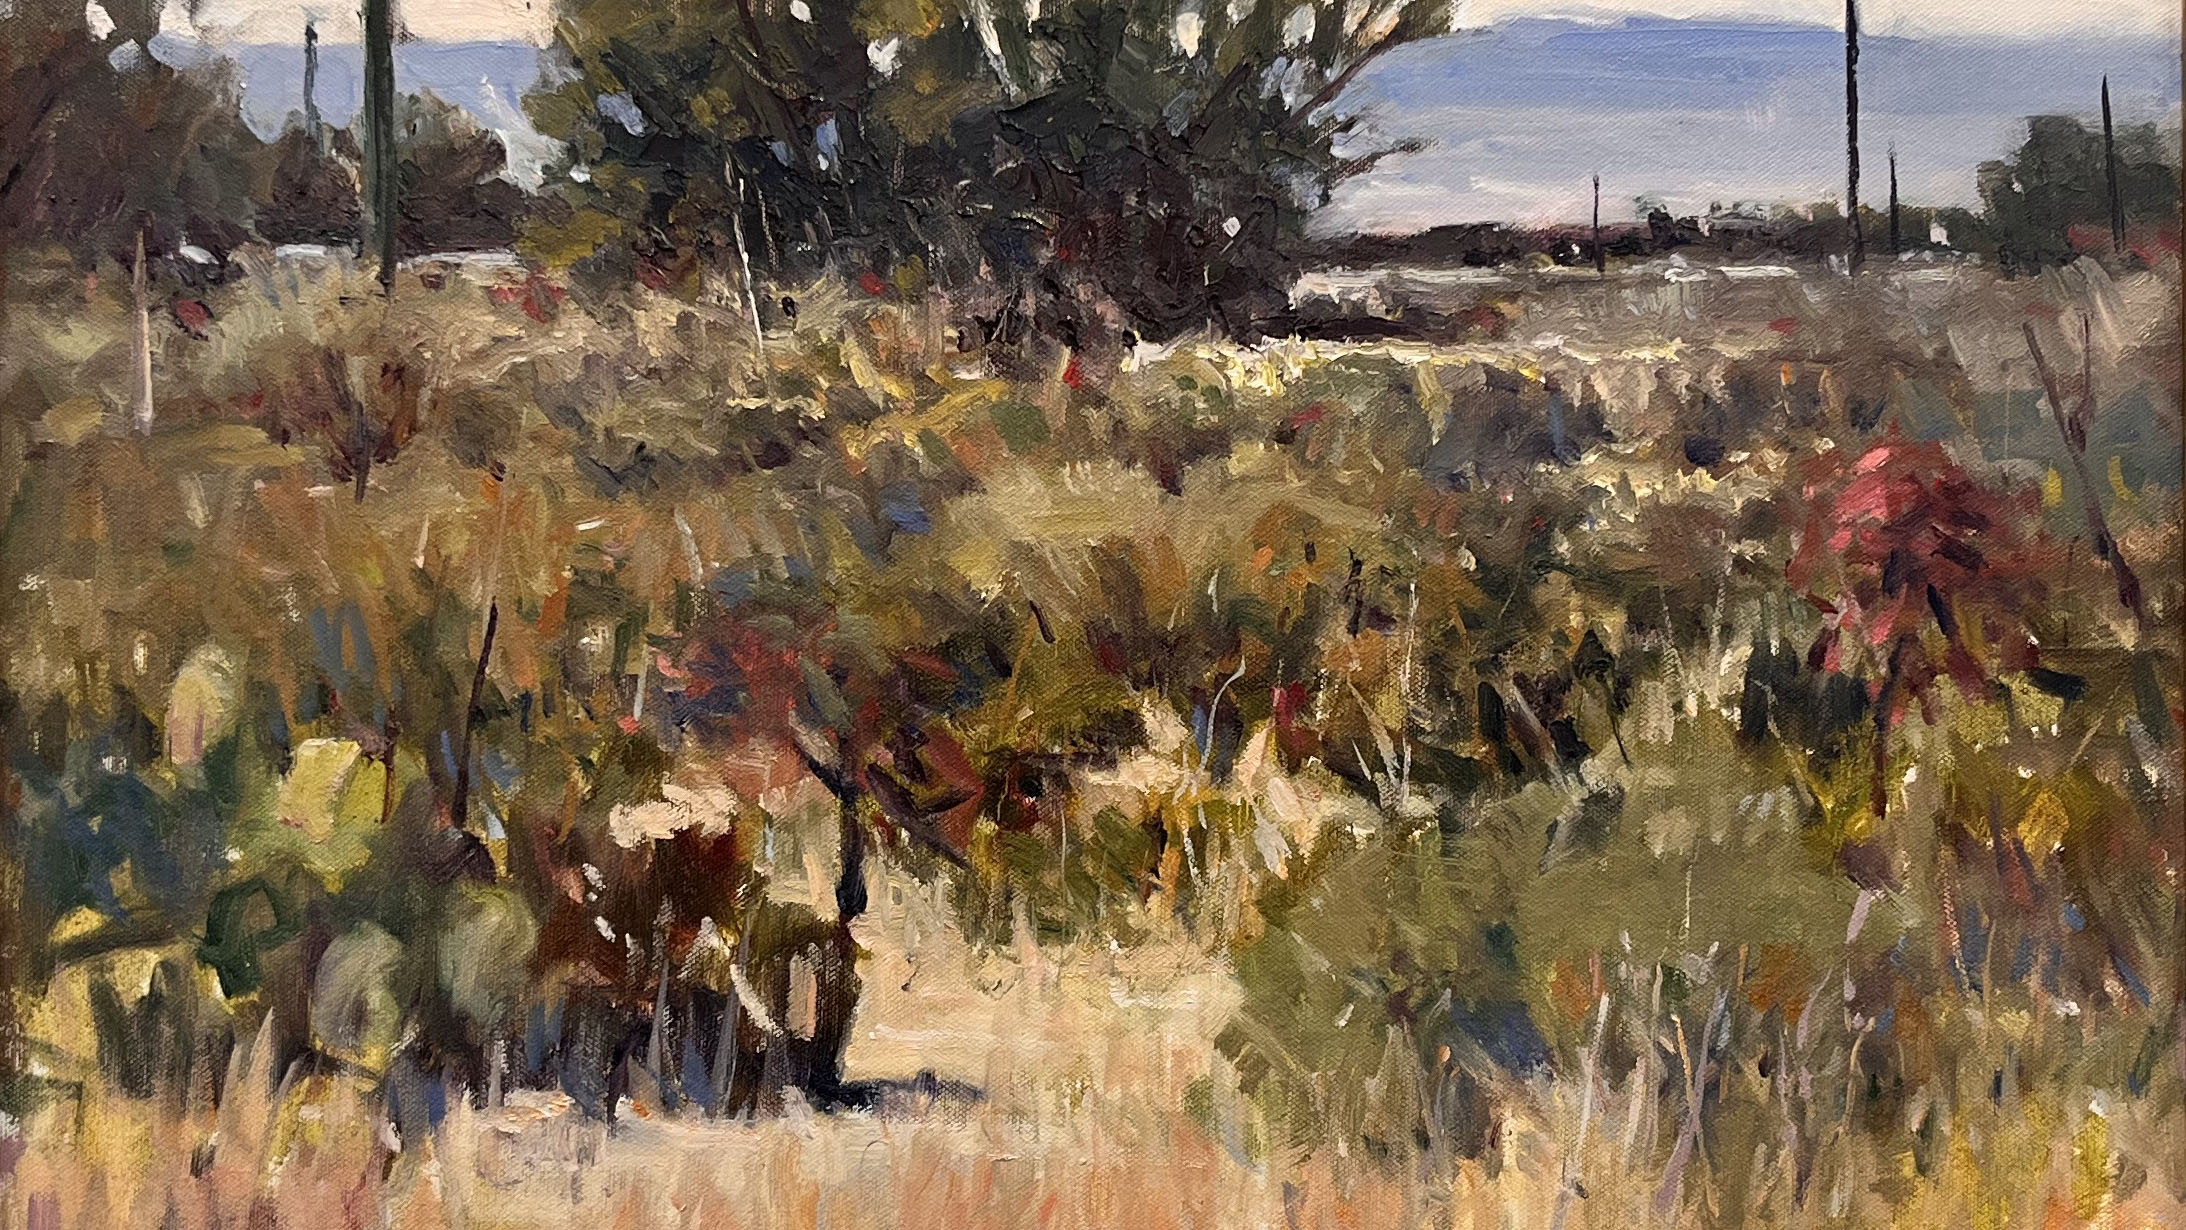 "Painting In, Painting Out": The world as seen by the Sonoran Plein Air Painters.